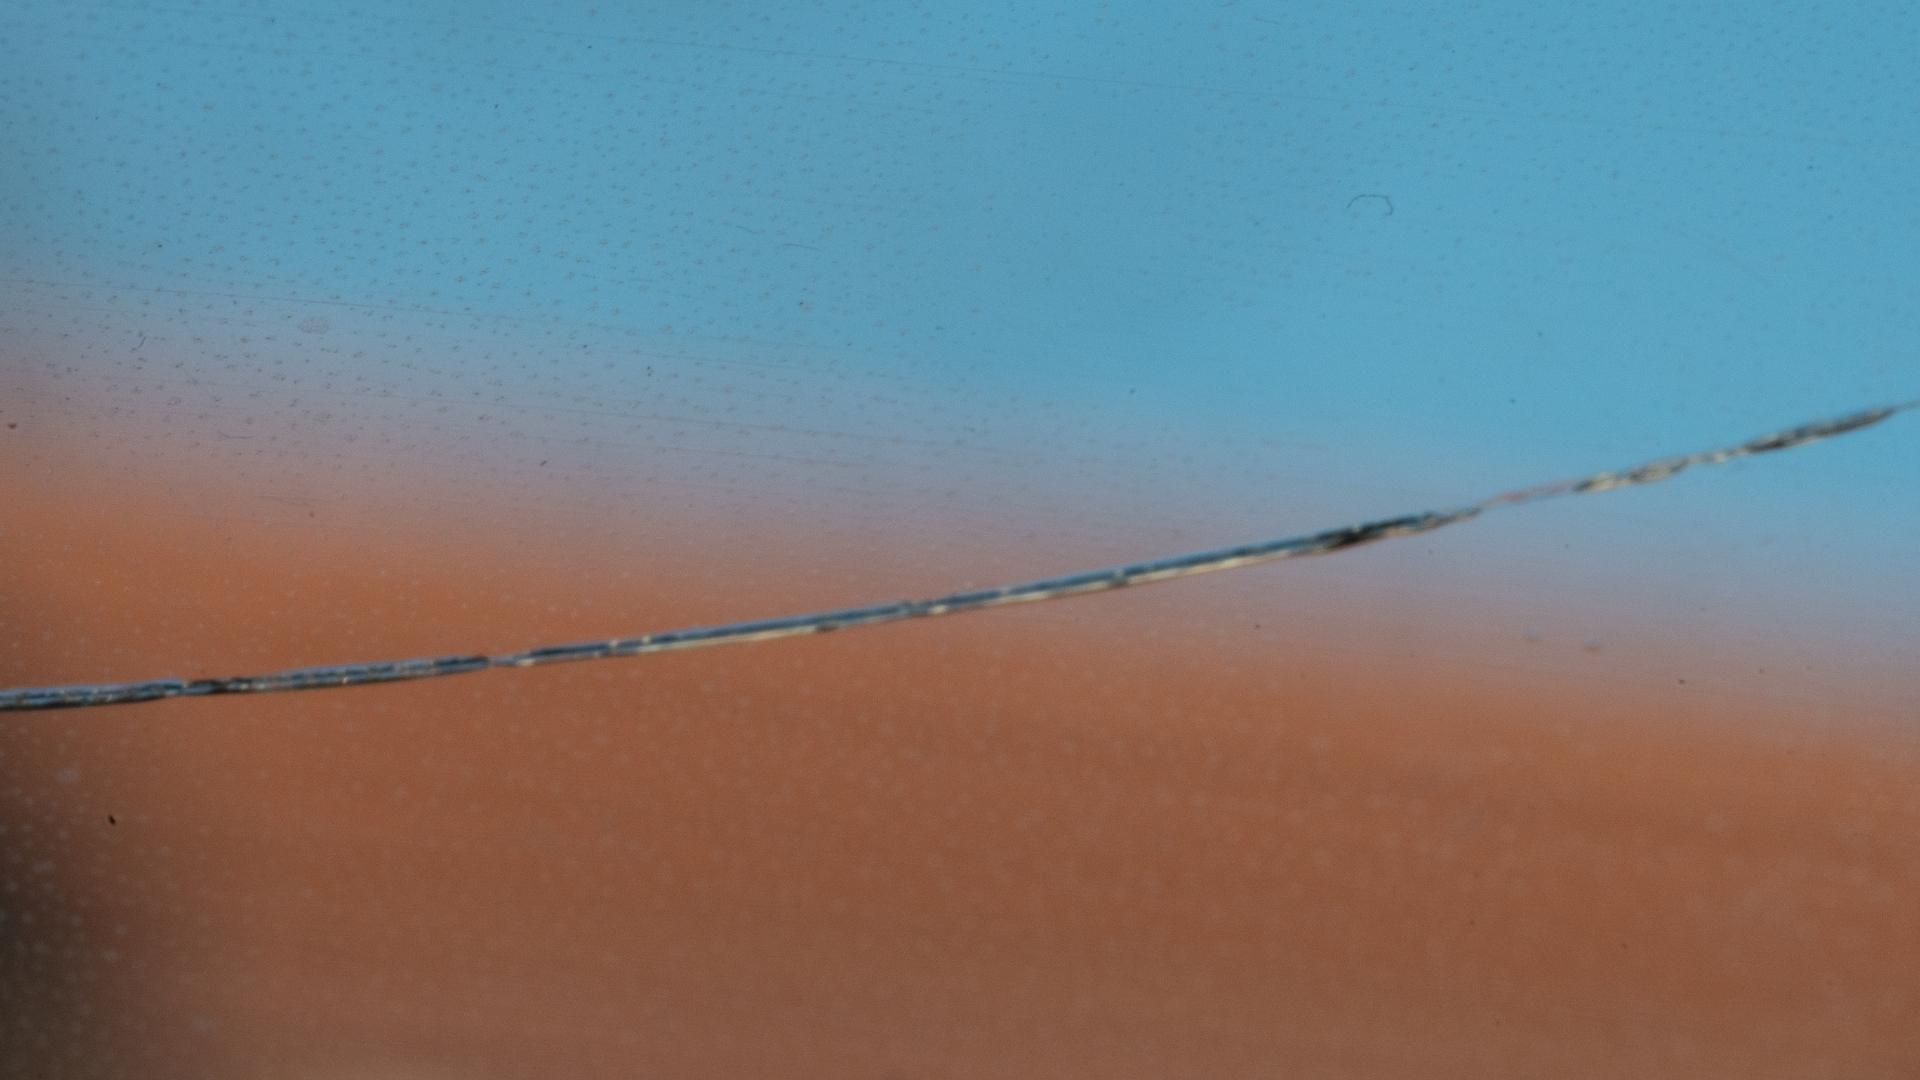 Close up of a long crack in a windshield